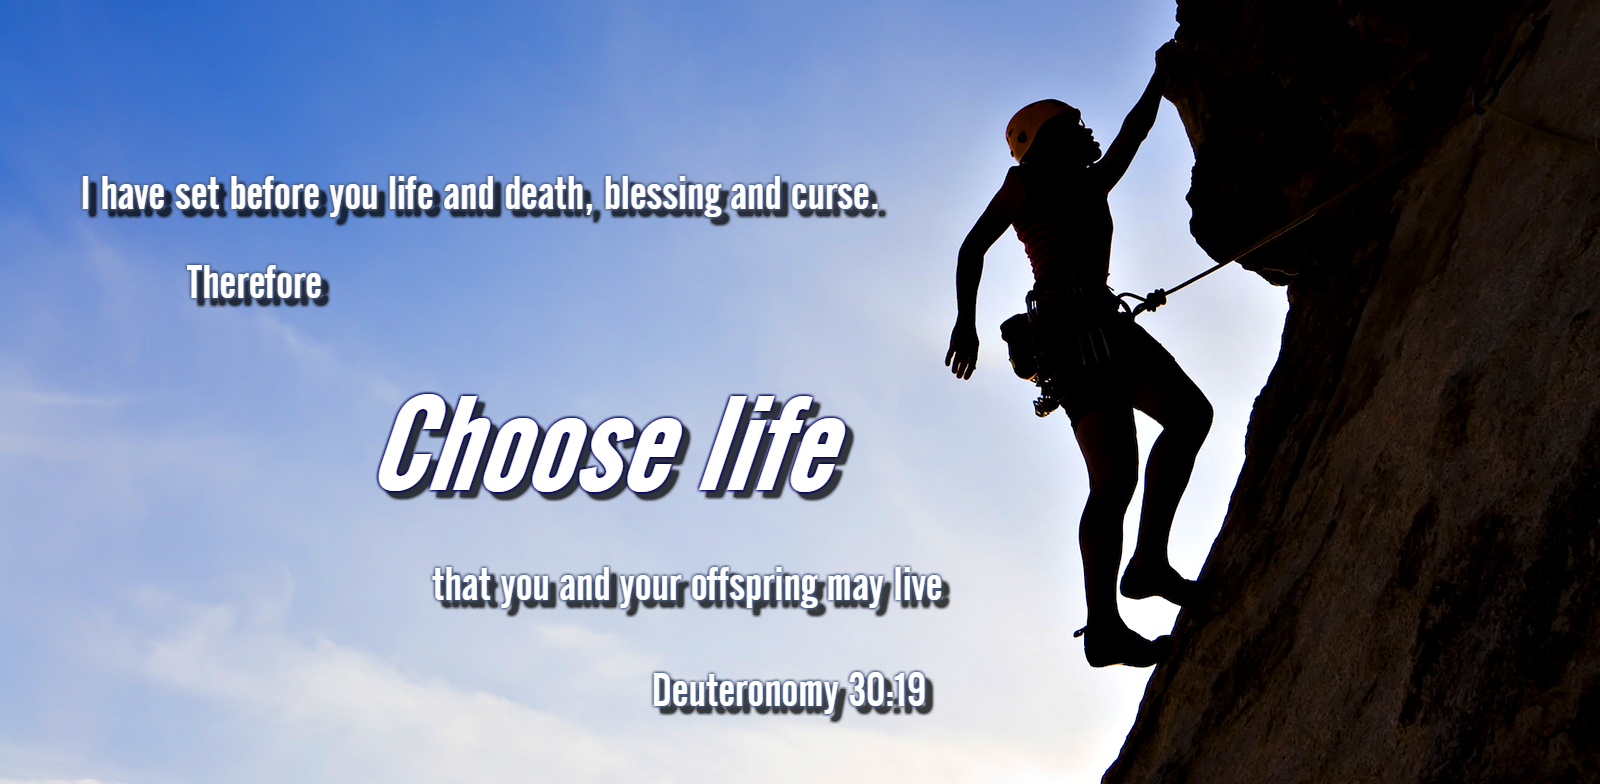 I call heaven and earth to witness against you today, that I have set before you life and death, blessing and curse. Therefore choose life, that you and your offspring may live, Deuteronomy 30:19